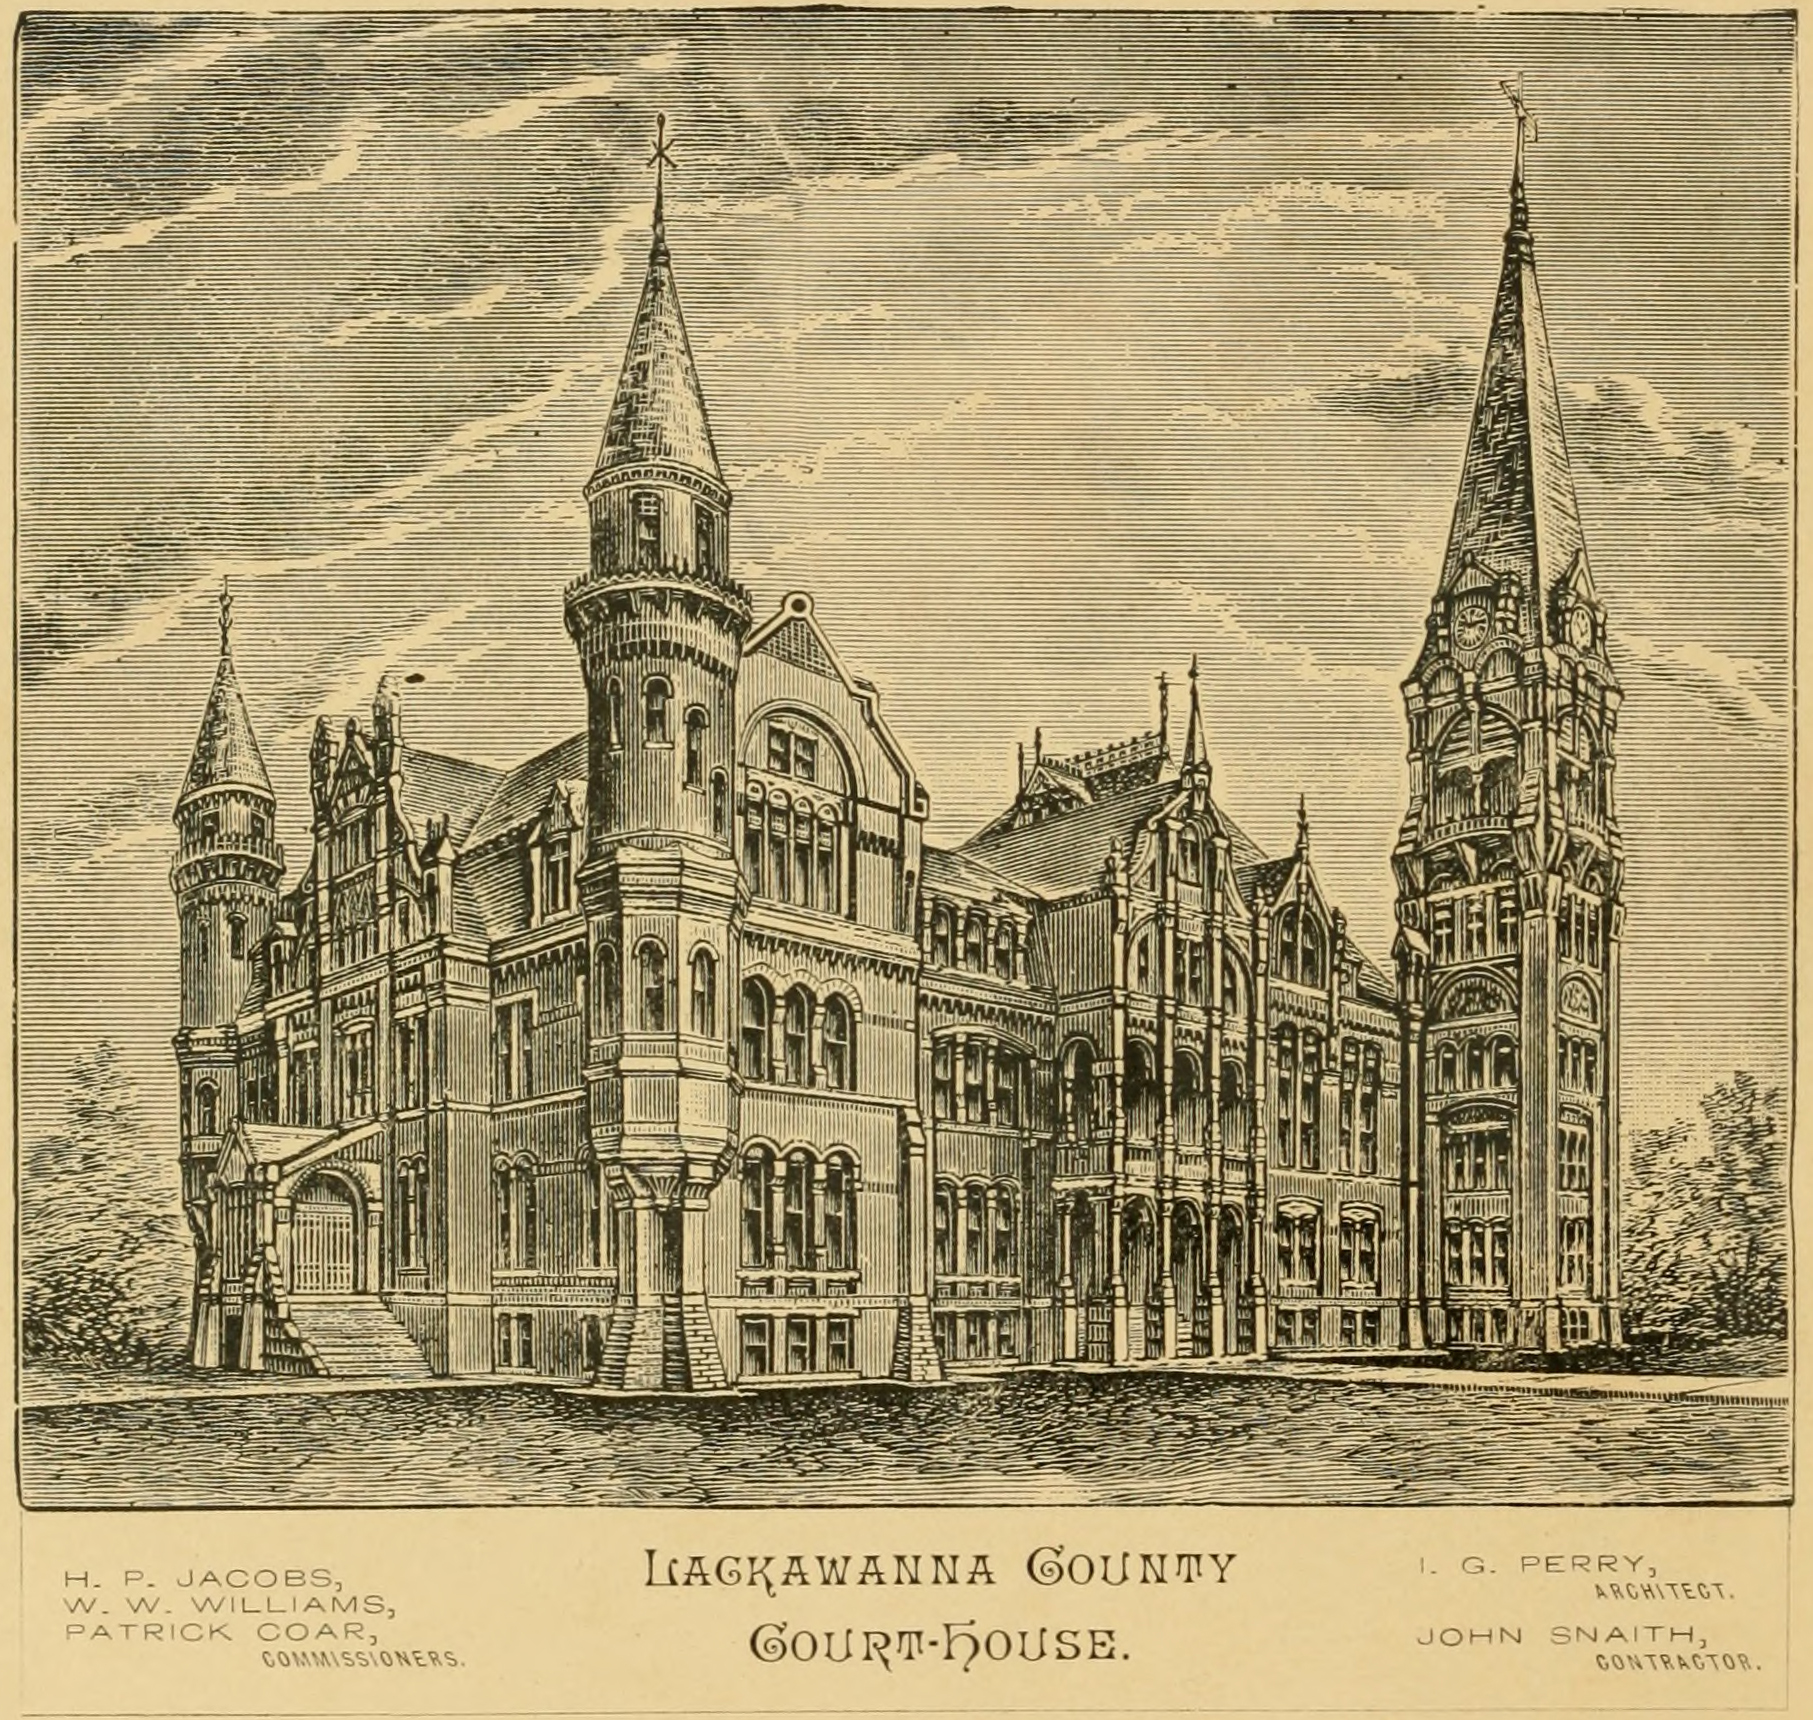 Proposed Lackawanna County Courthouse, 1882